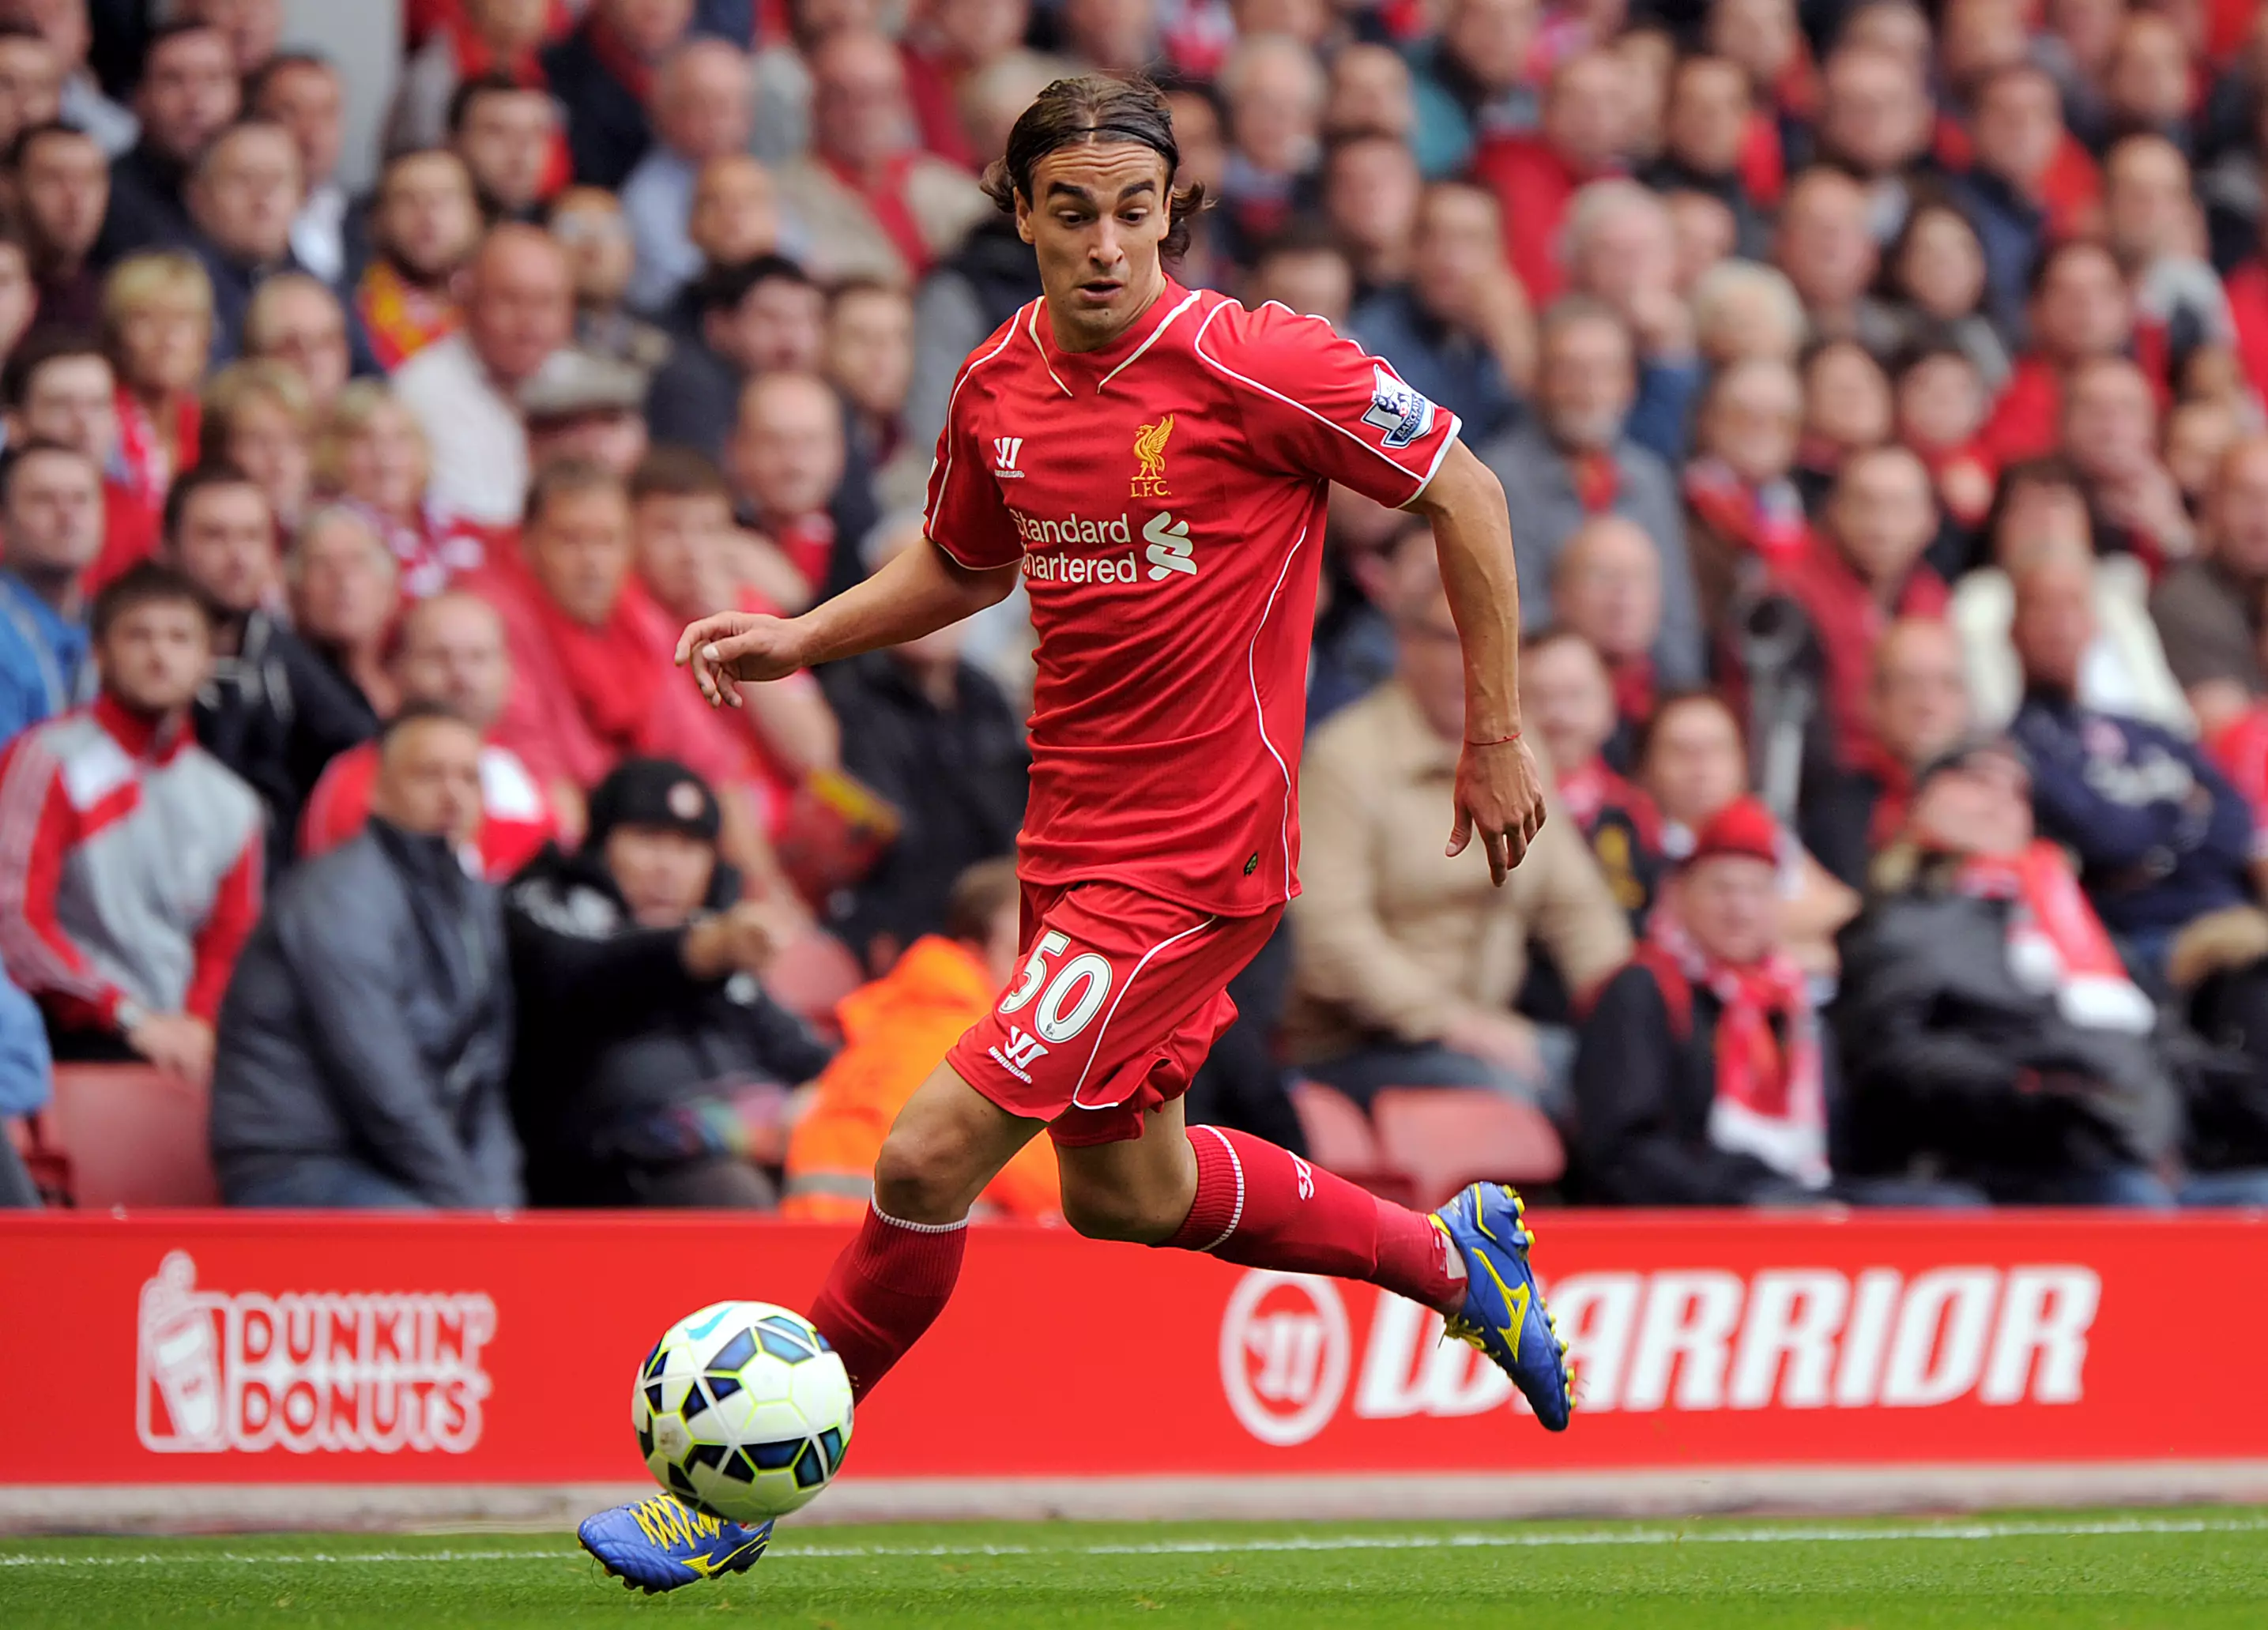 Markovic playing in the Premier League. Image: PA Images